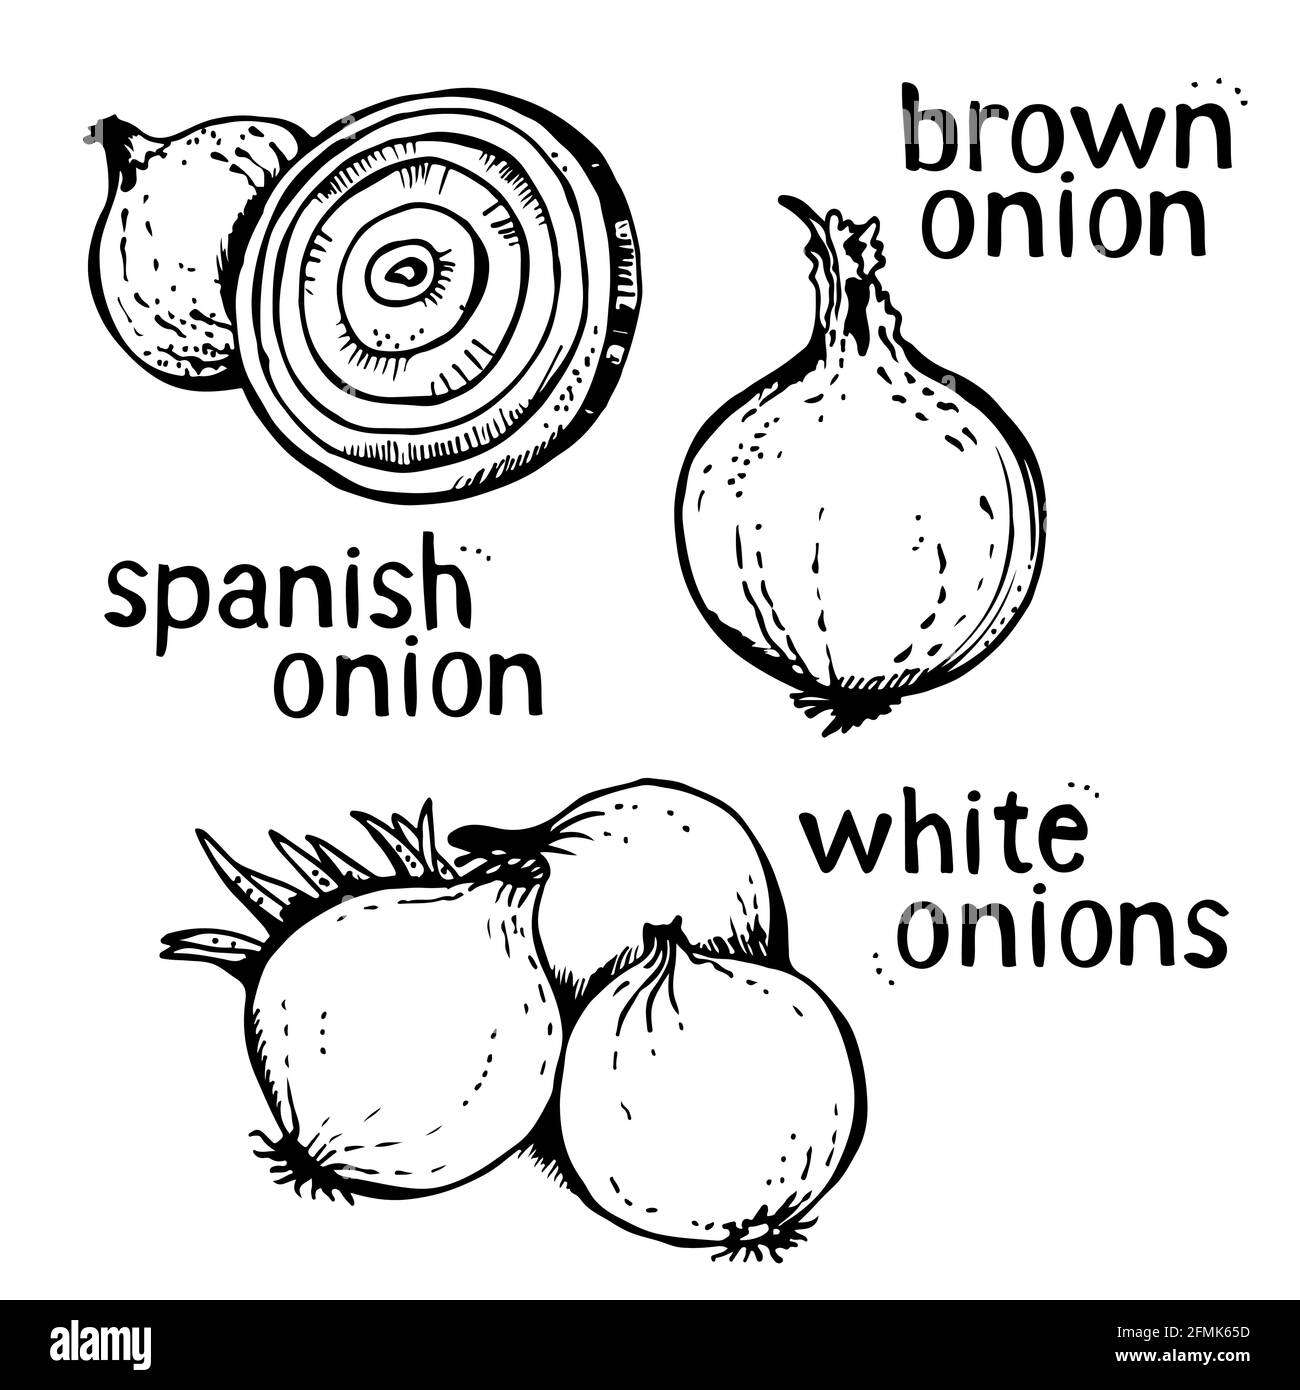 Onion vector set of hand drawn line art illustration, isolated on white background Stock Vector